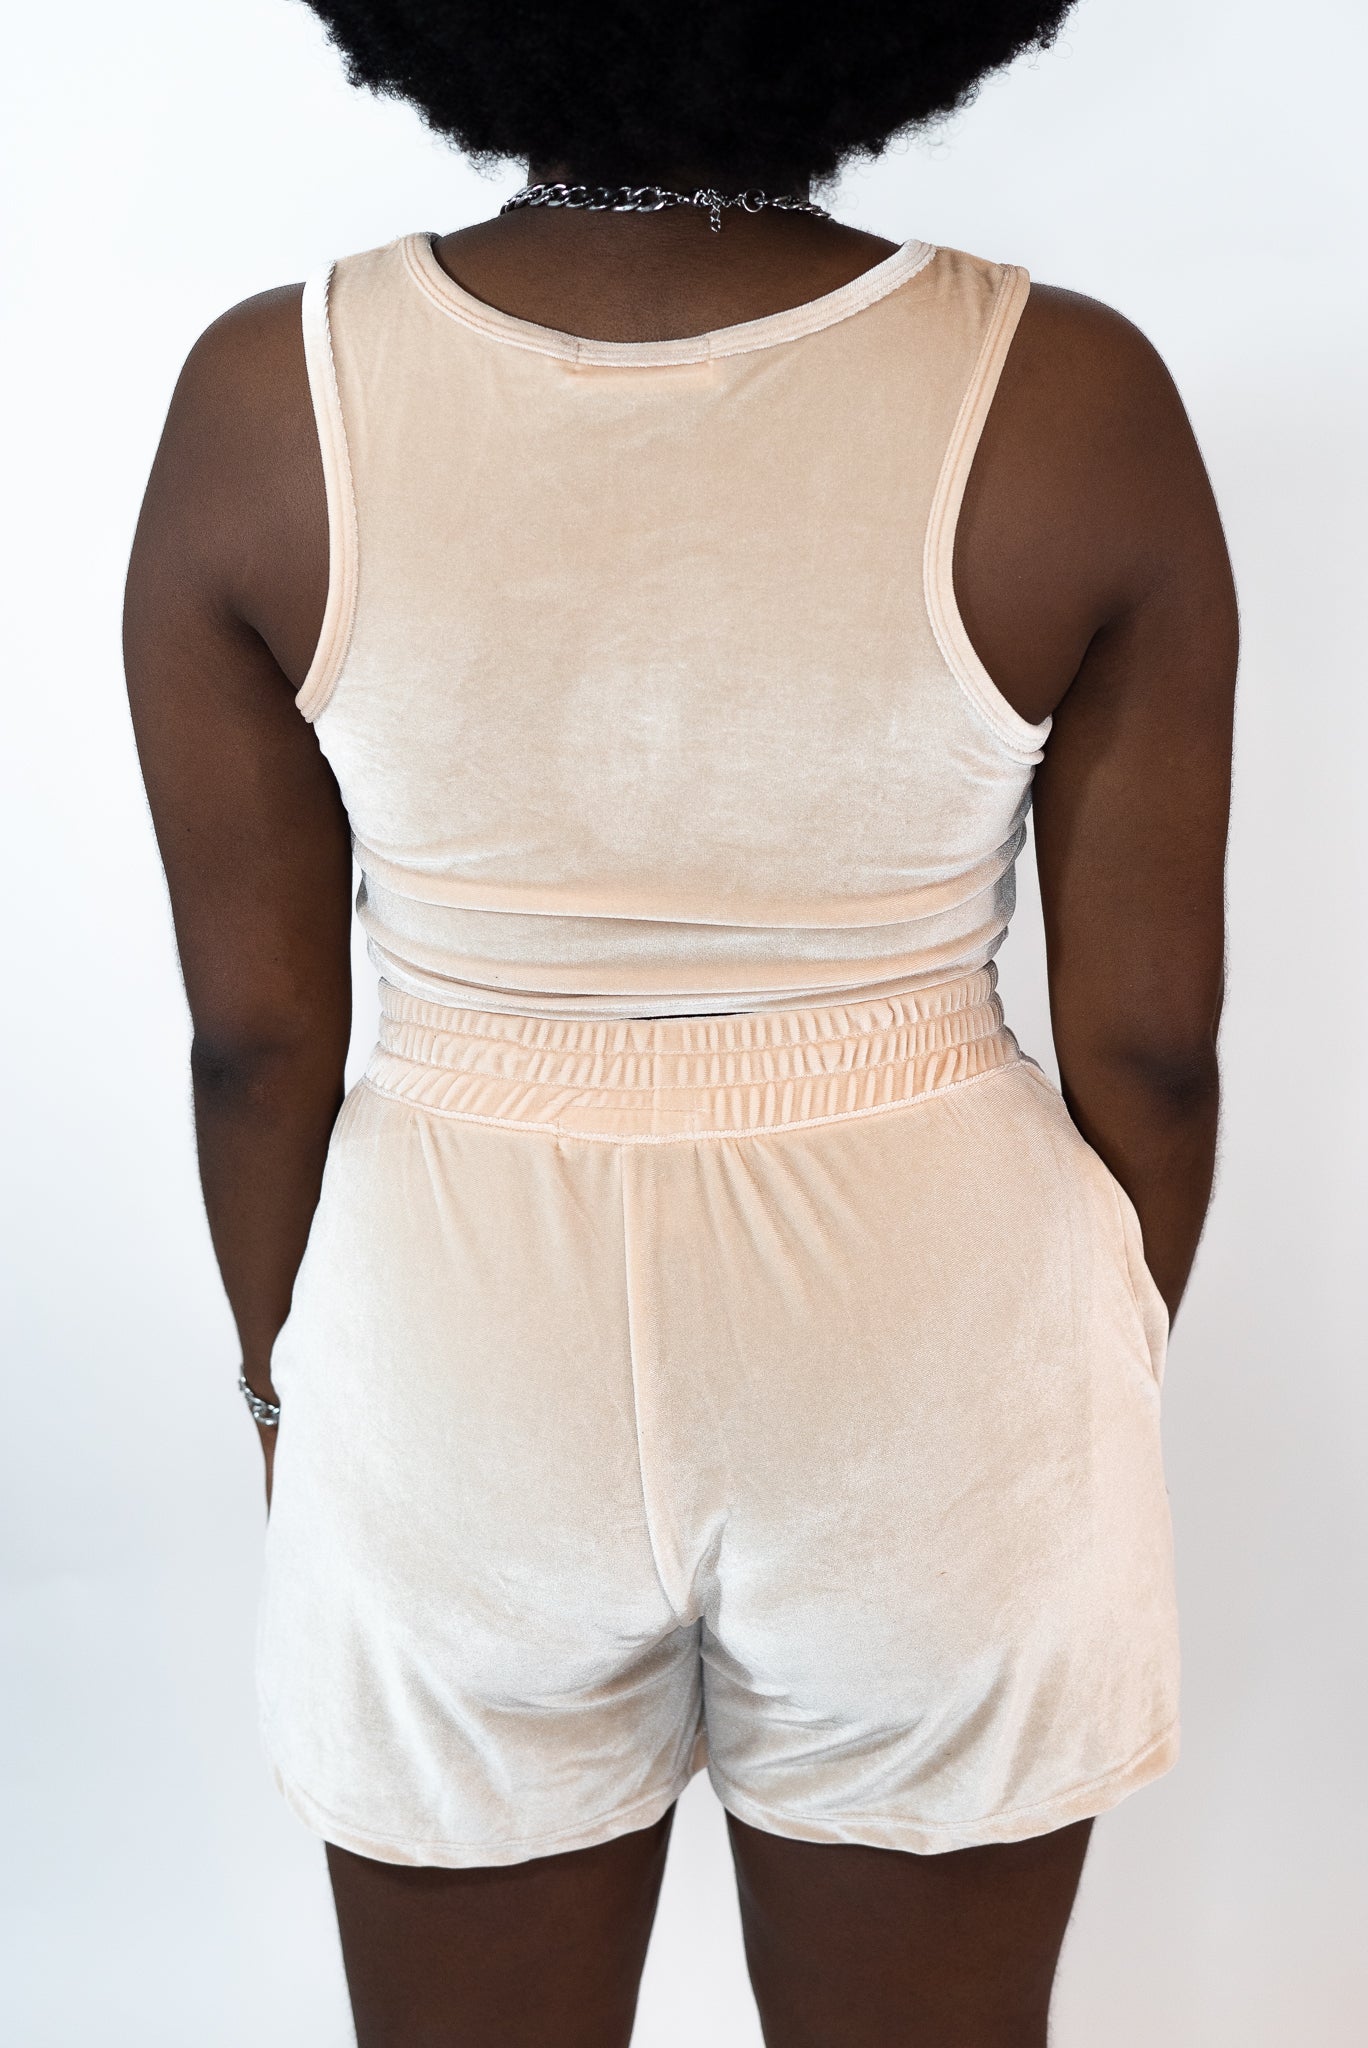 Back shot of model wearing beige tank top and shorts. The tank top has the E's Element logo imprinted in white in the middle. Ella Champagne Velvet Set by E's Element.Ella Champagne Velvet Set - E's Element